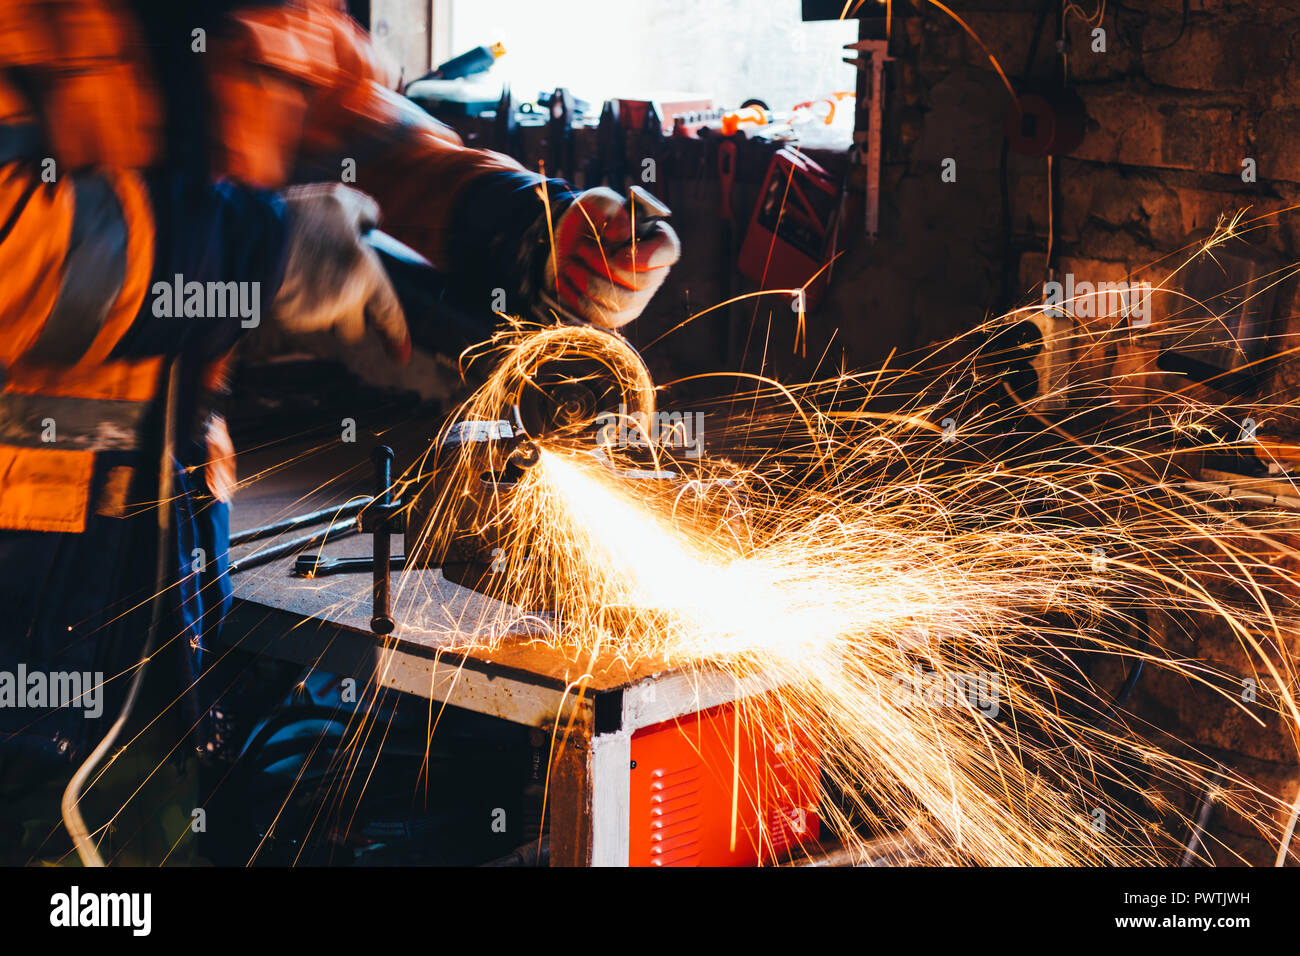 Worker cutting metal with grinder in his workshop. Sparks while grinding iron. Stock Photo